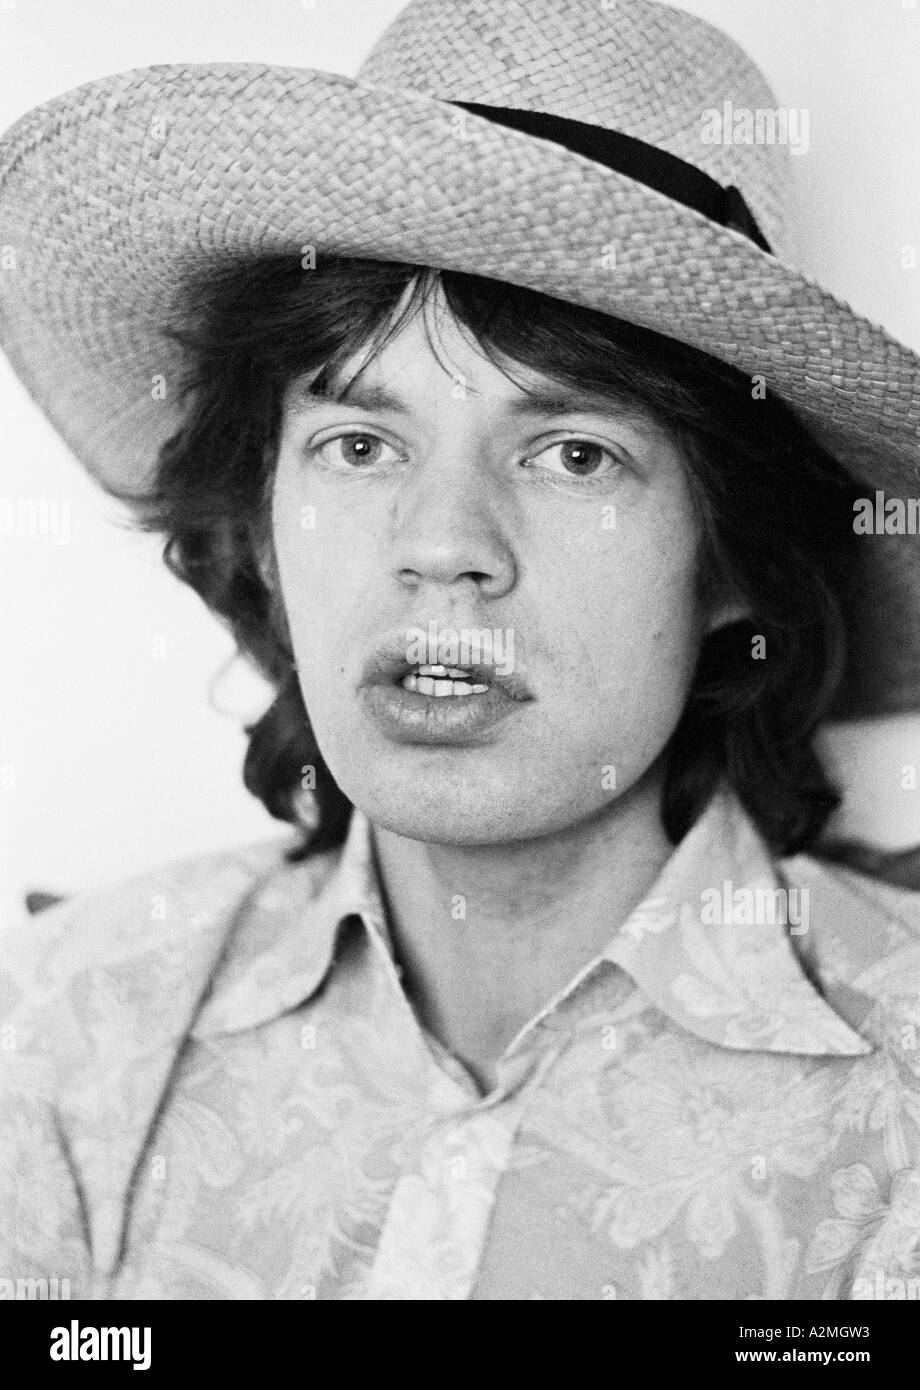 Mick Jagger, a legend in his own lifetime. Singer, performer & musician& leader of The Rolling Stones. Stock Photo